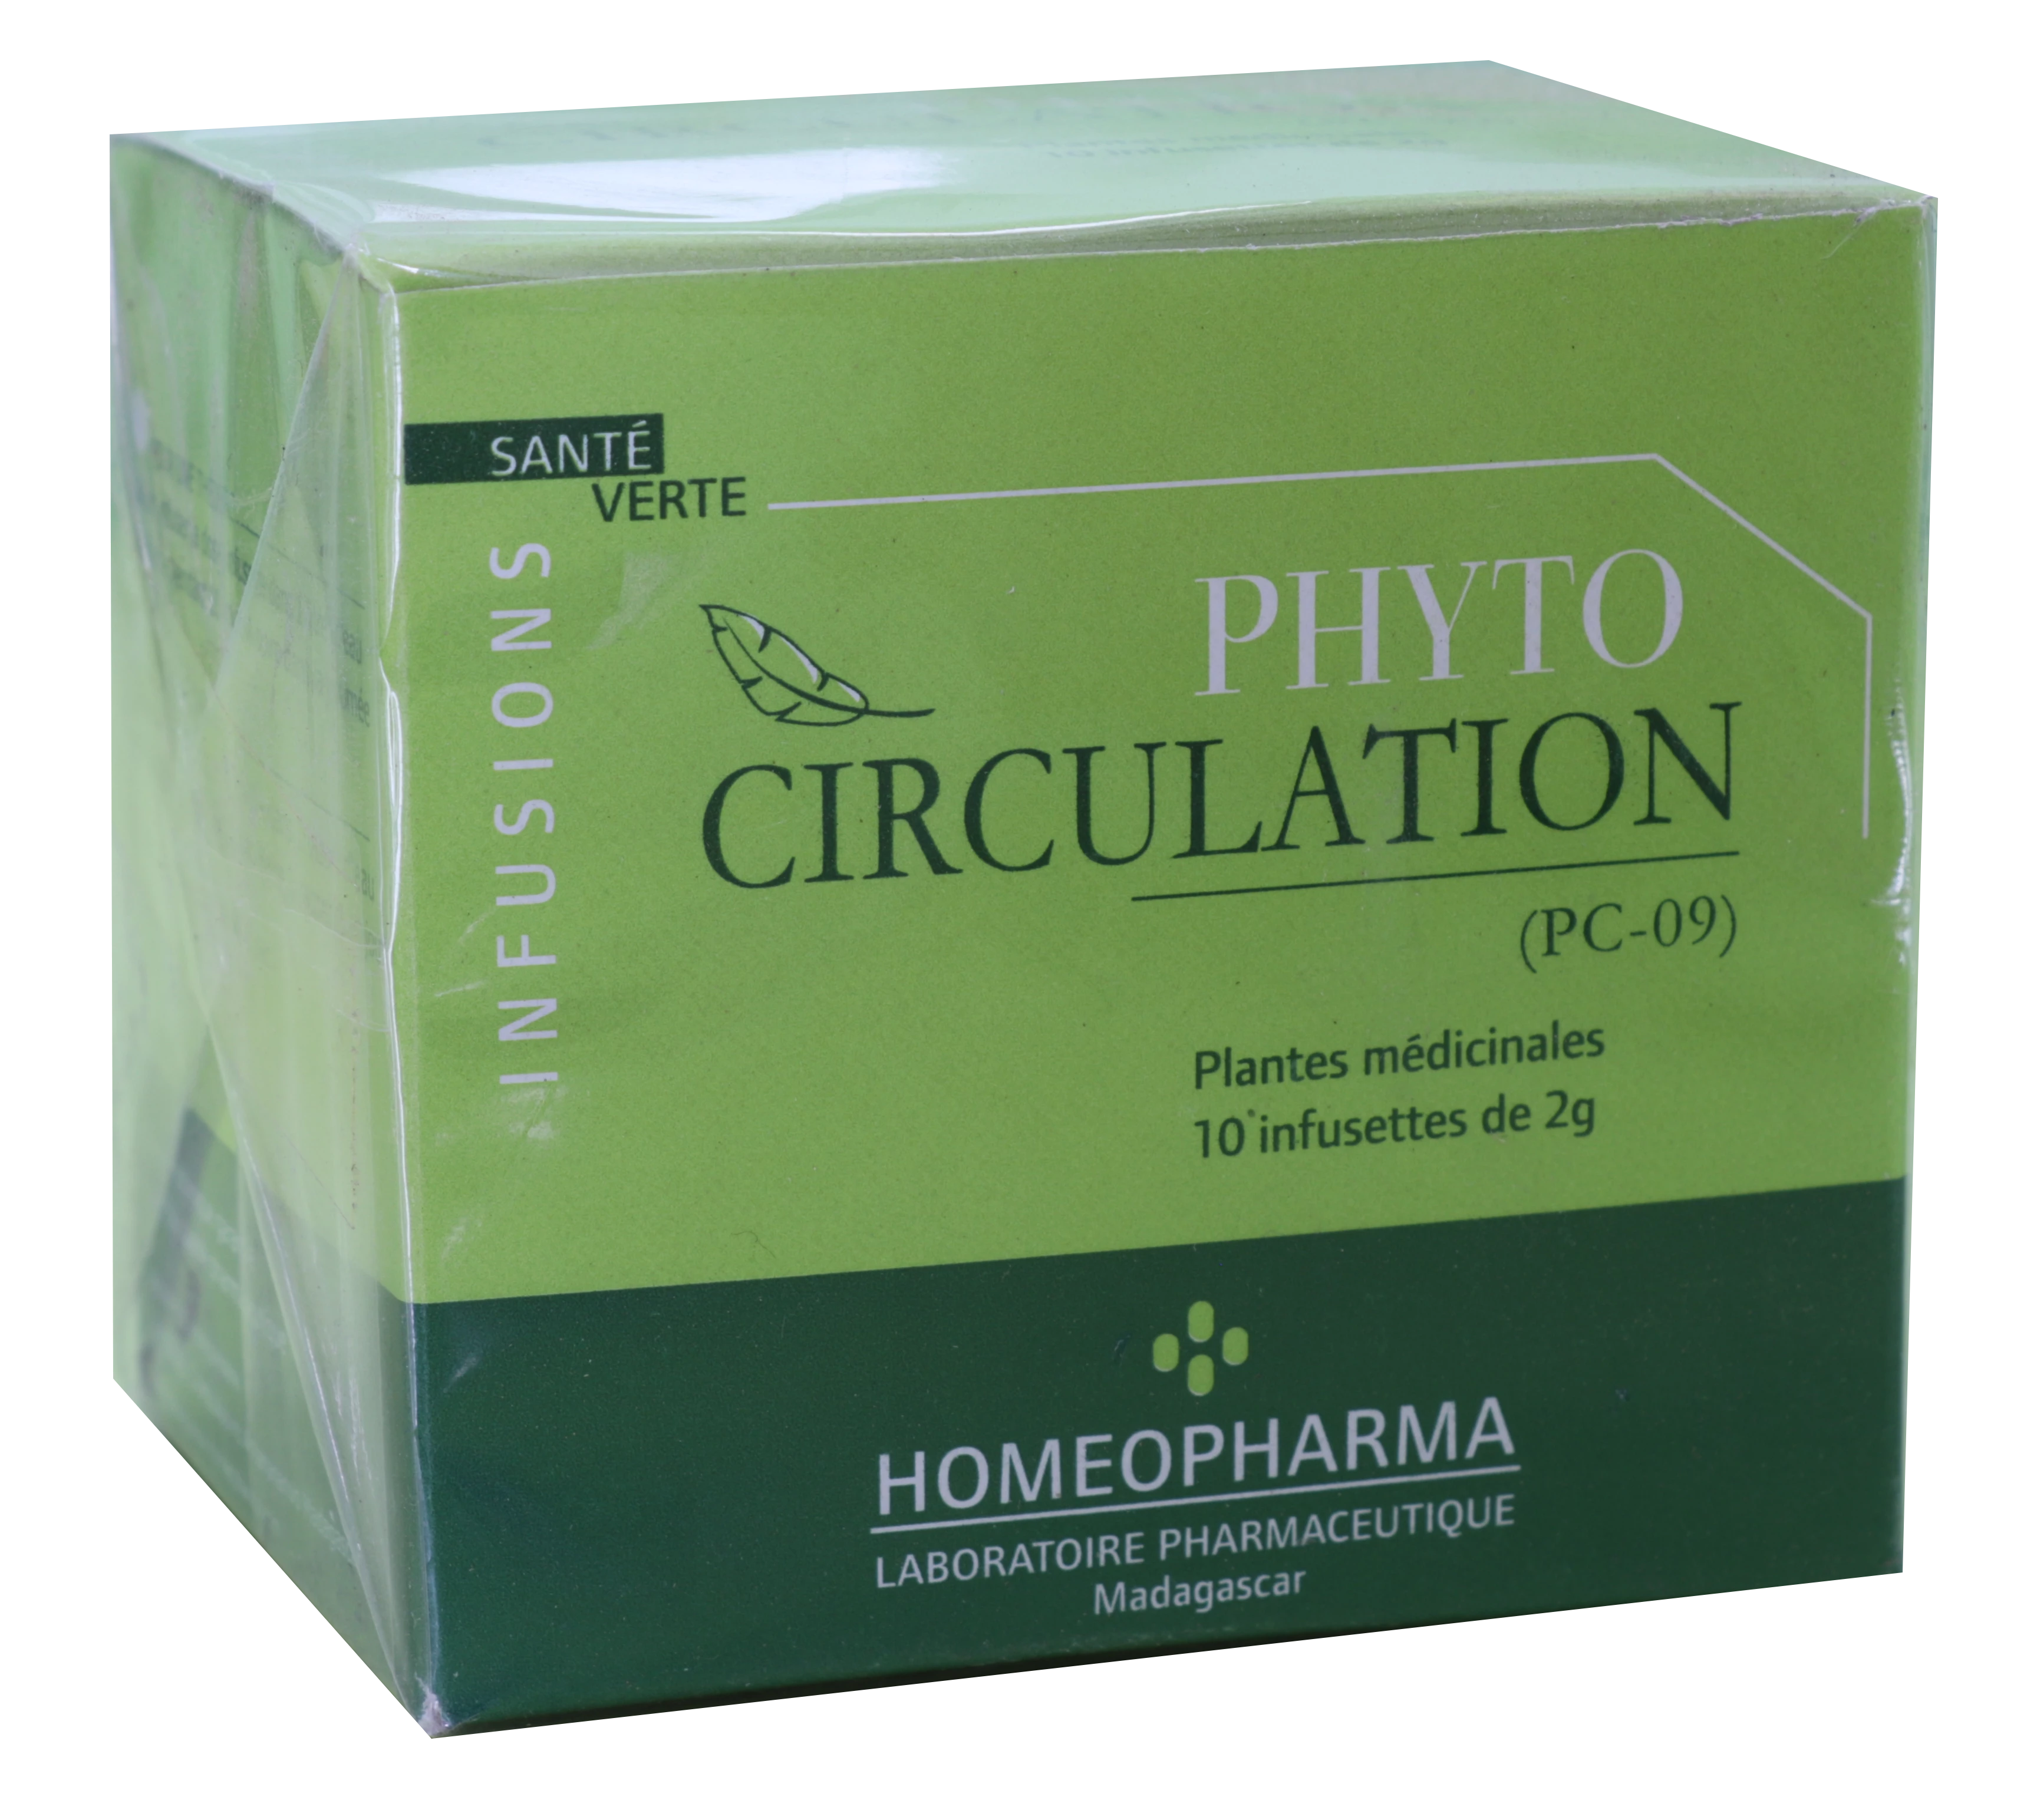 Phytotherapie Traditionnelle Pc09-phyto-circulation Bte 20 Infusetten - HOMEOPHARMA